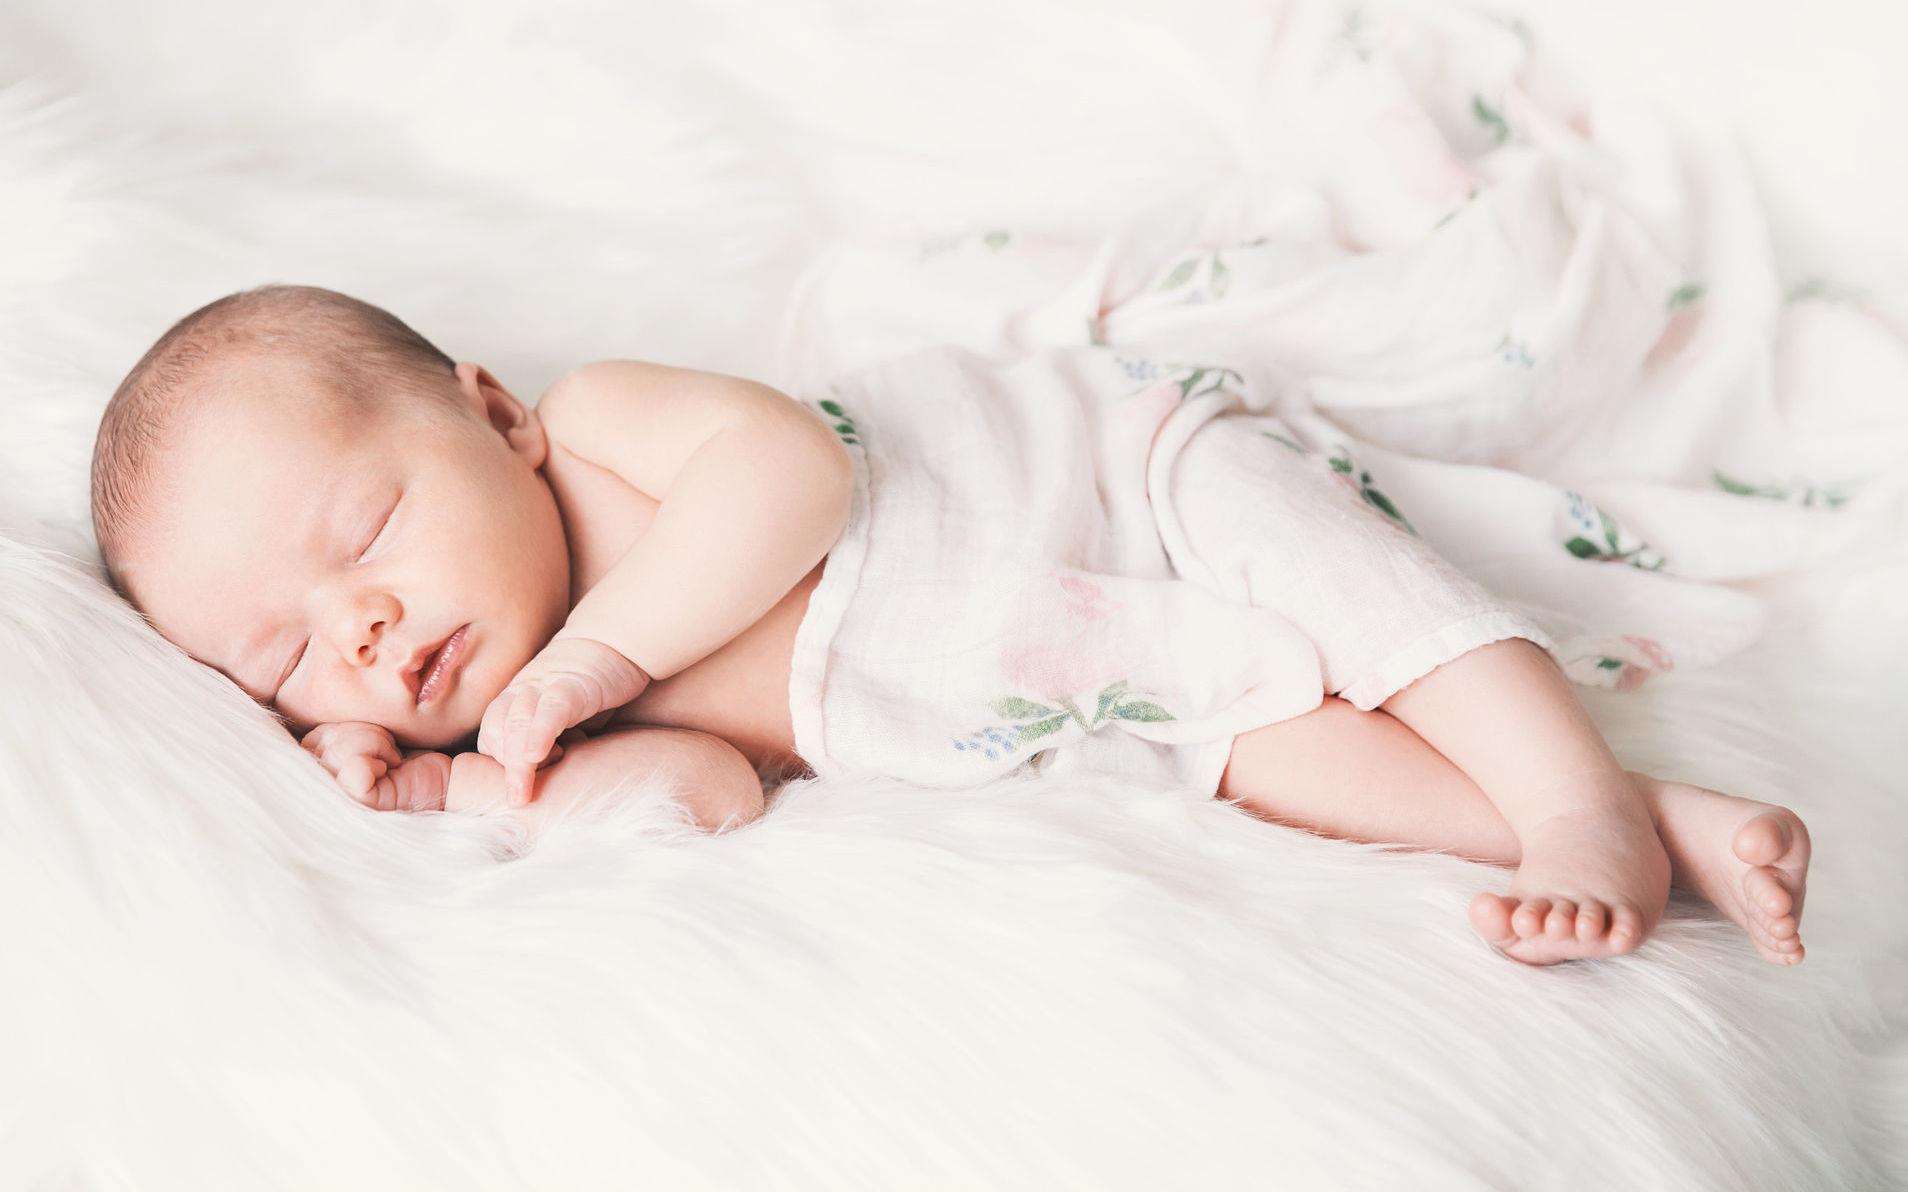 Generally, your baby should sleep for longer periods the older she gets